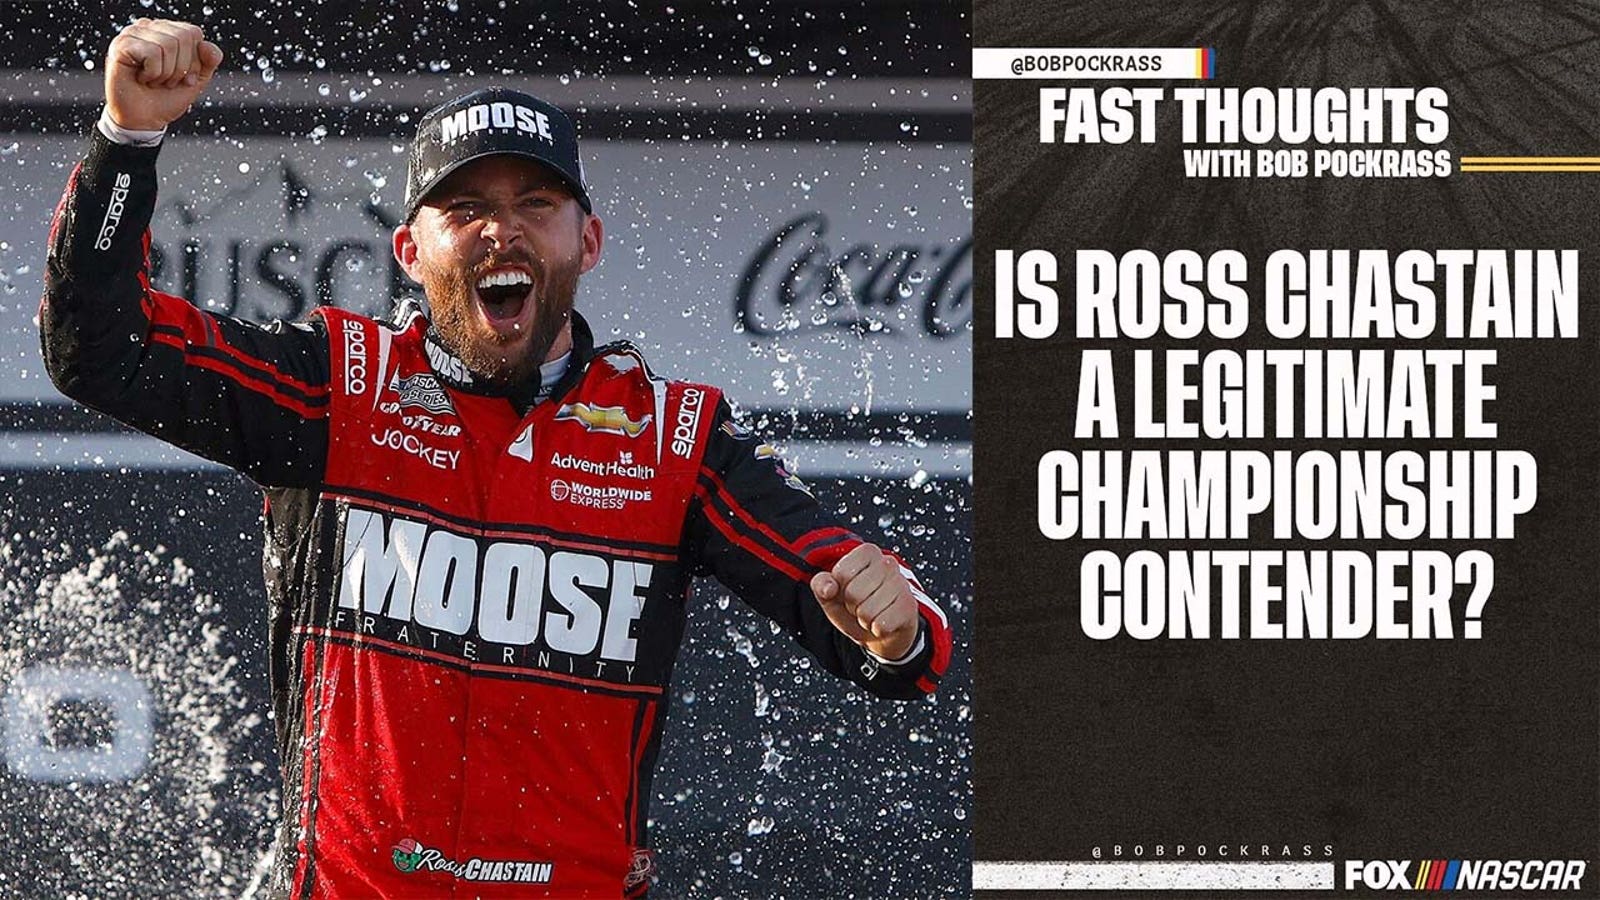 Is Ross Chastain a legitimate championship contender?